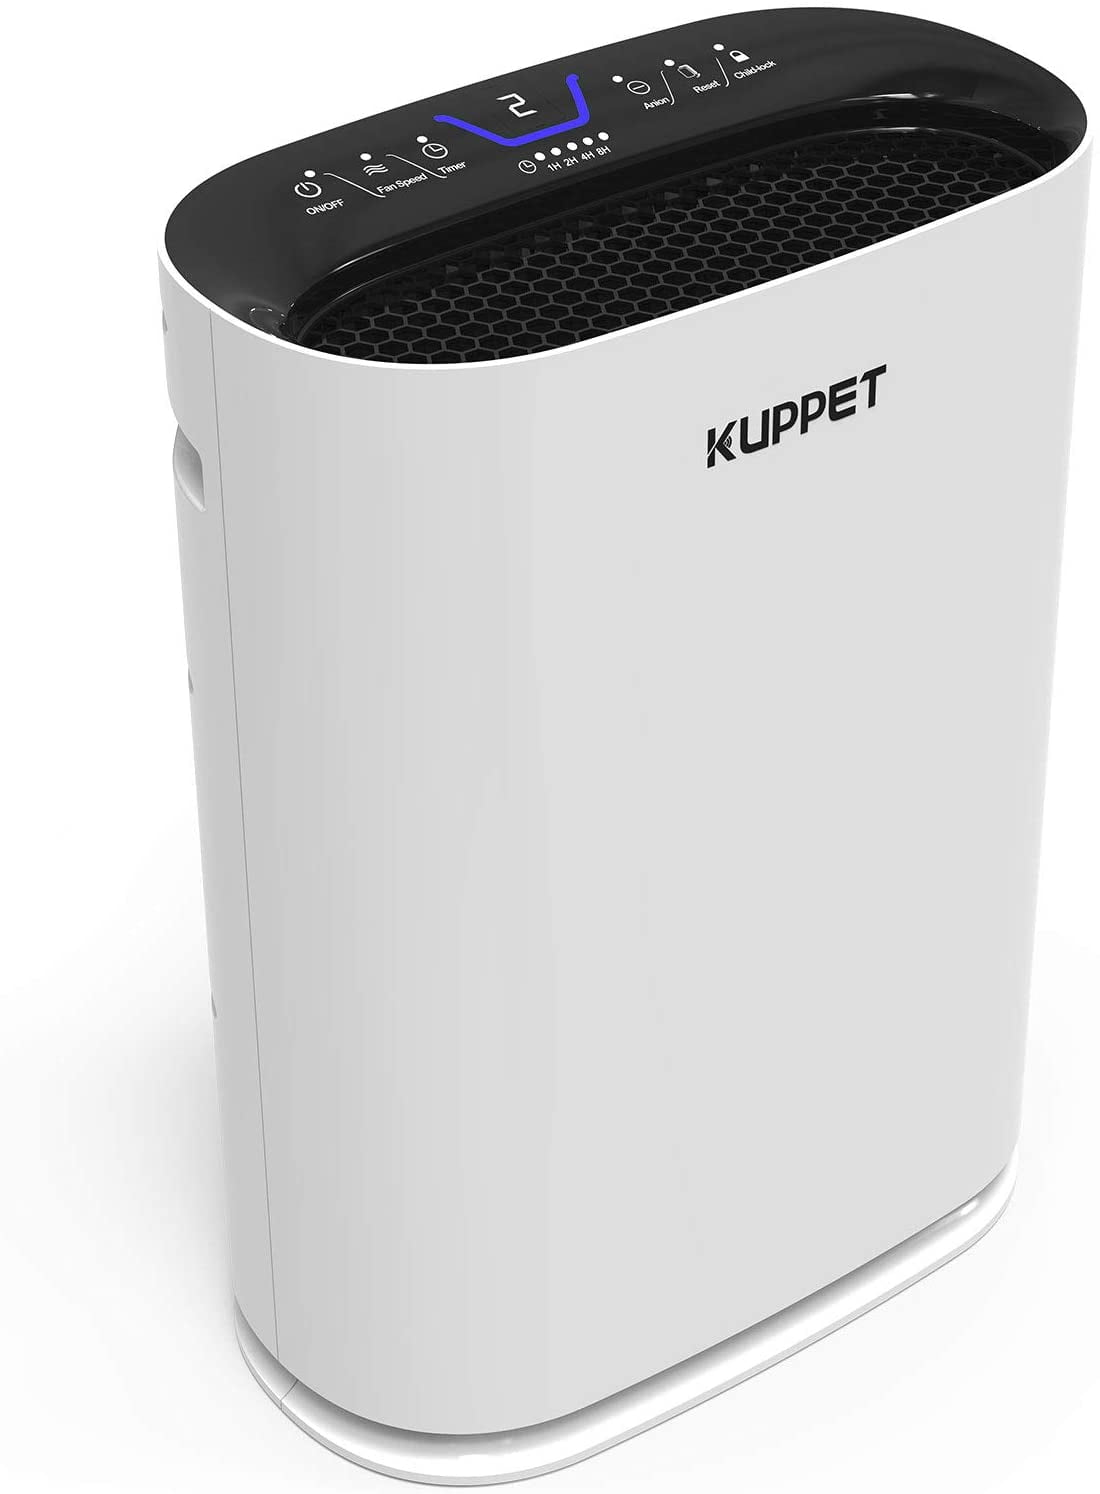 Kuppet Air Purifier for Home Allergies and Pets Hair, Smokers, True